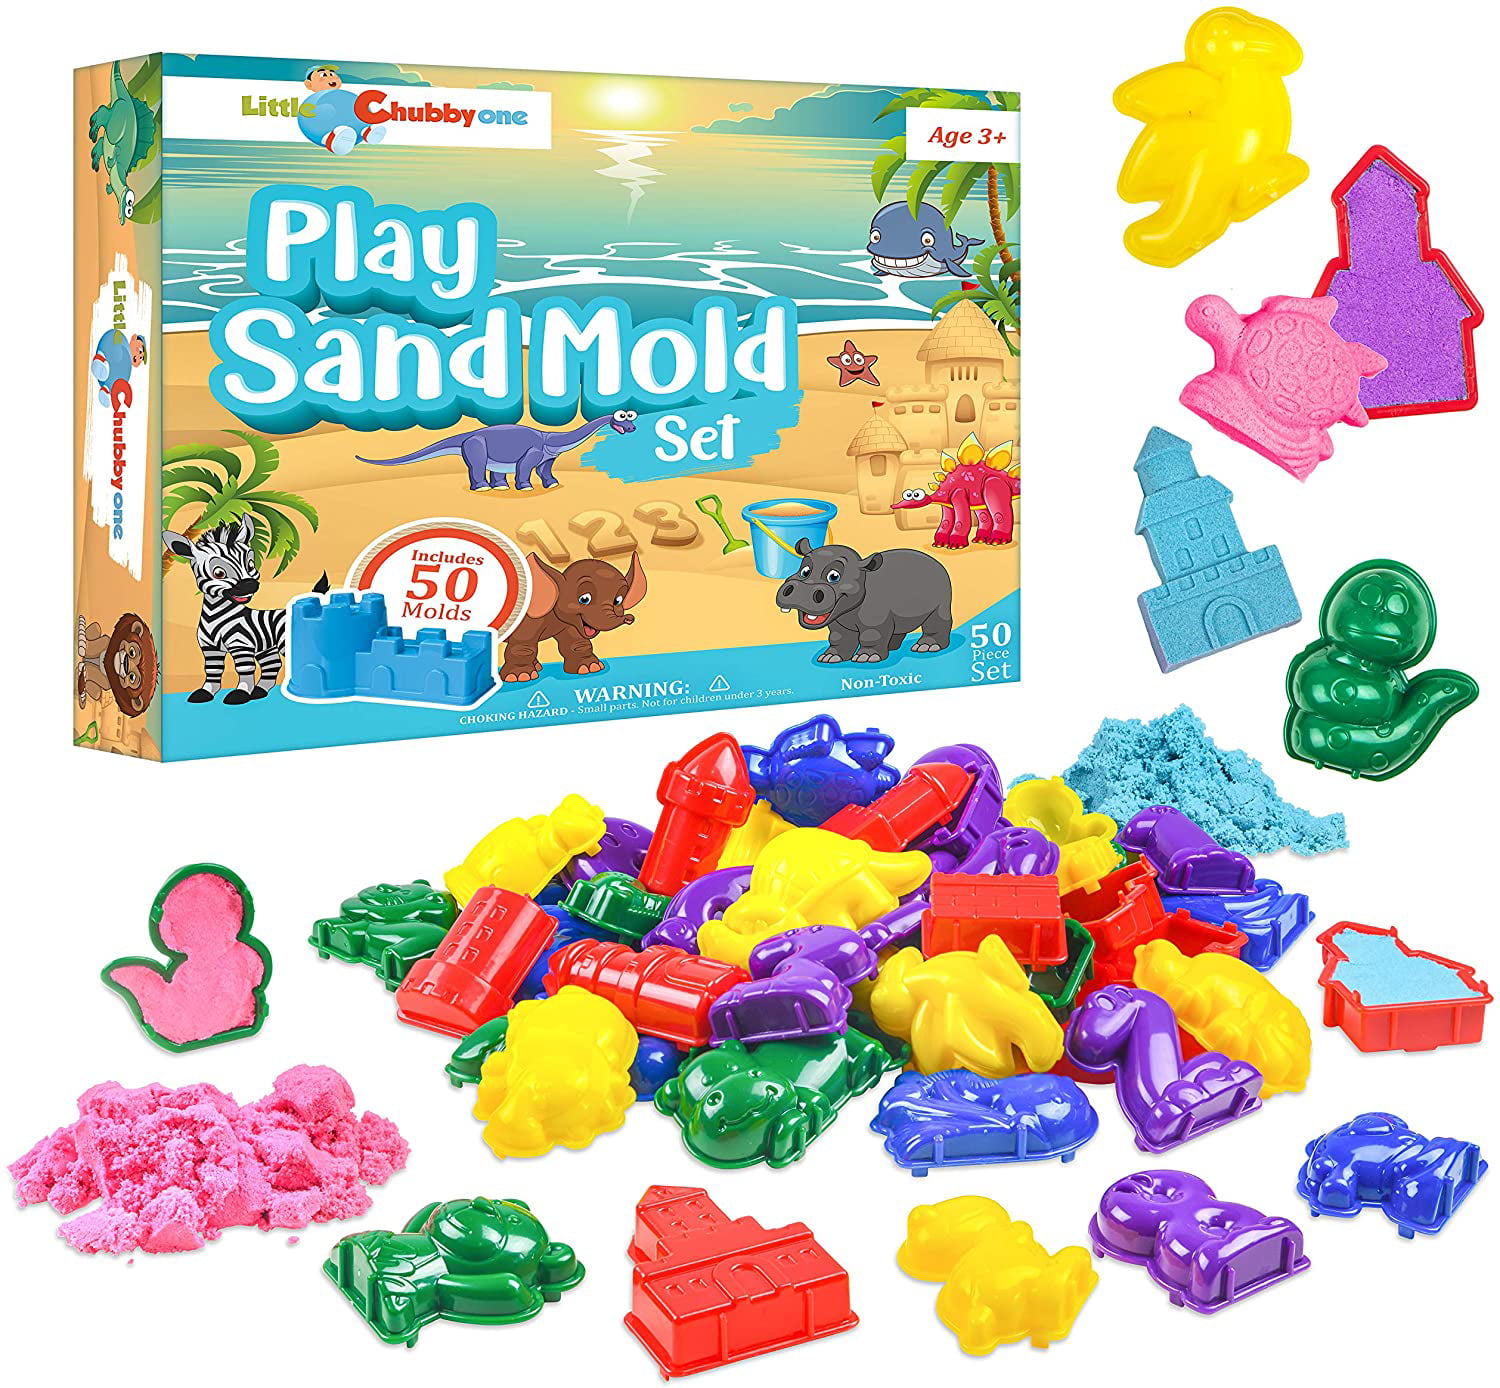 Sands Alive Farm Molding Play Sand Playset With Play Mat And Animal Molds 